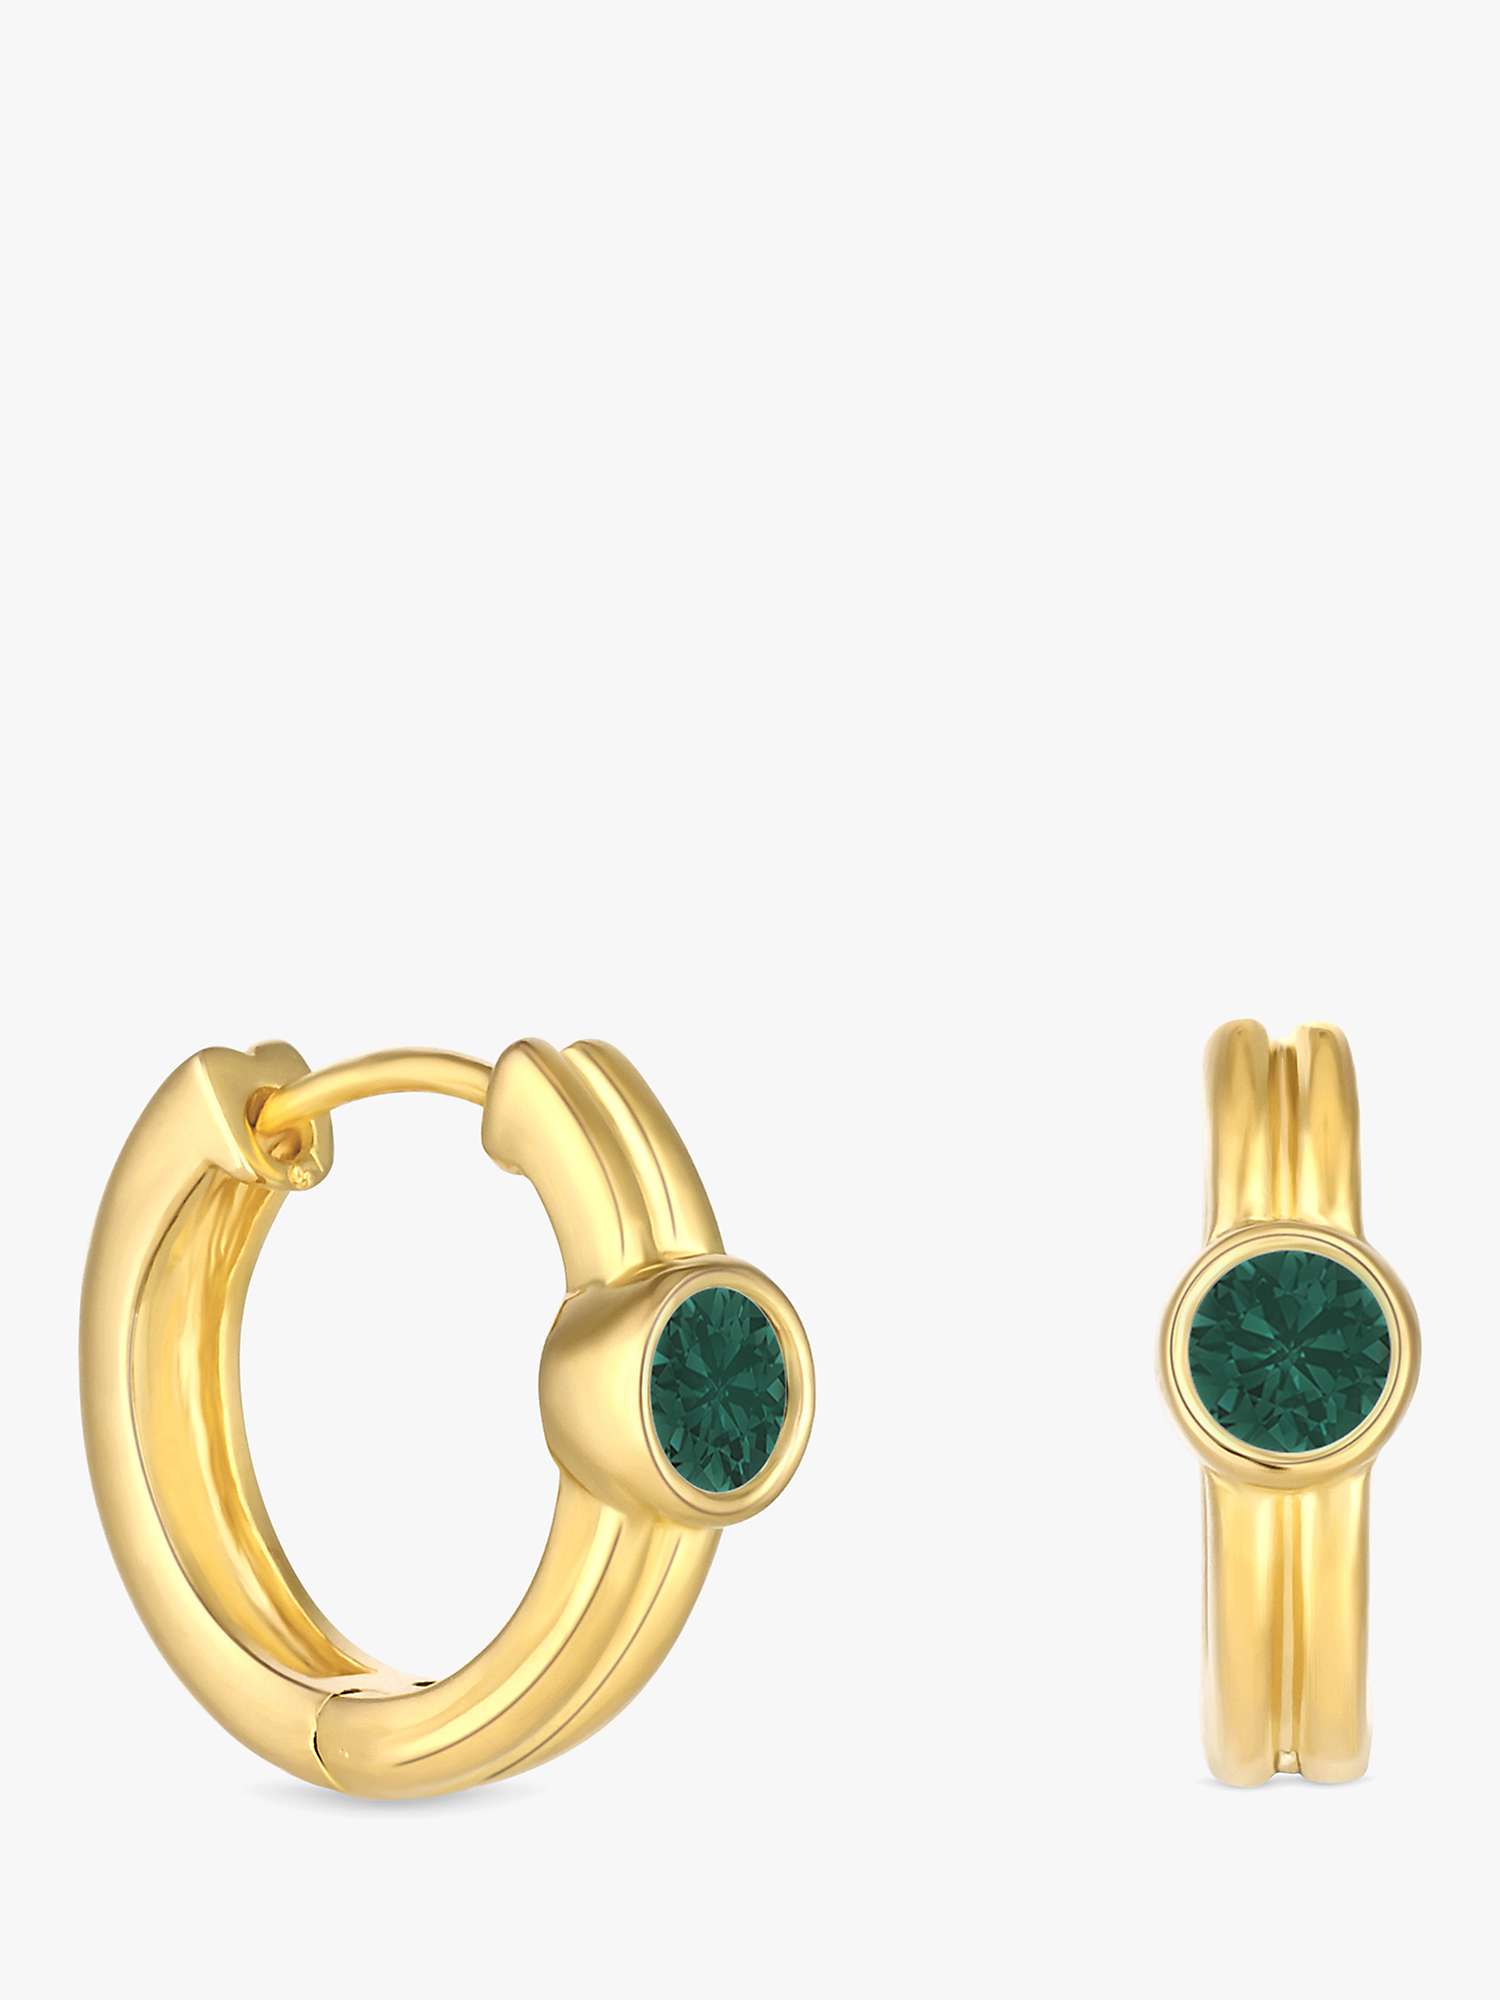 Buy Simply Silver Sterling Silver 925 Gold Plated Emerald Hoop Earrings, Gold Online at johnlewis.com